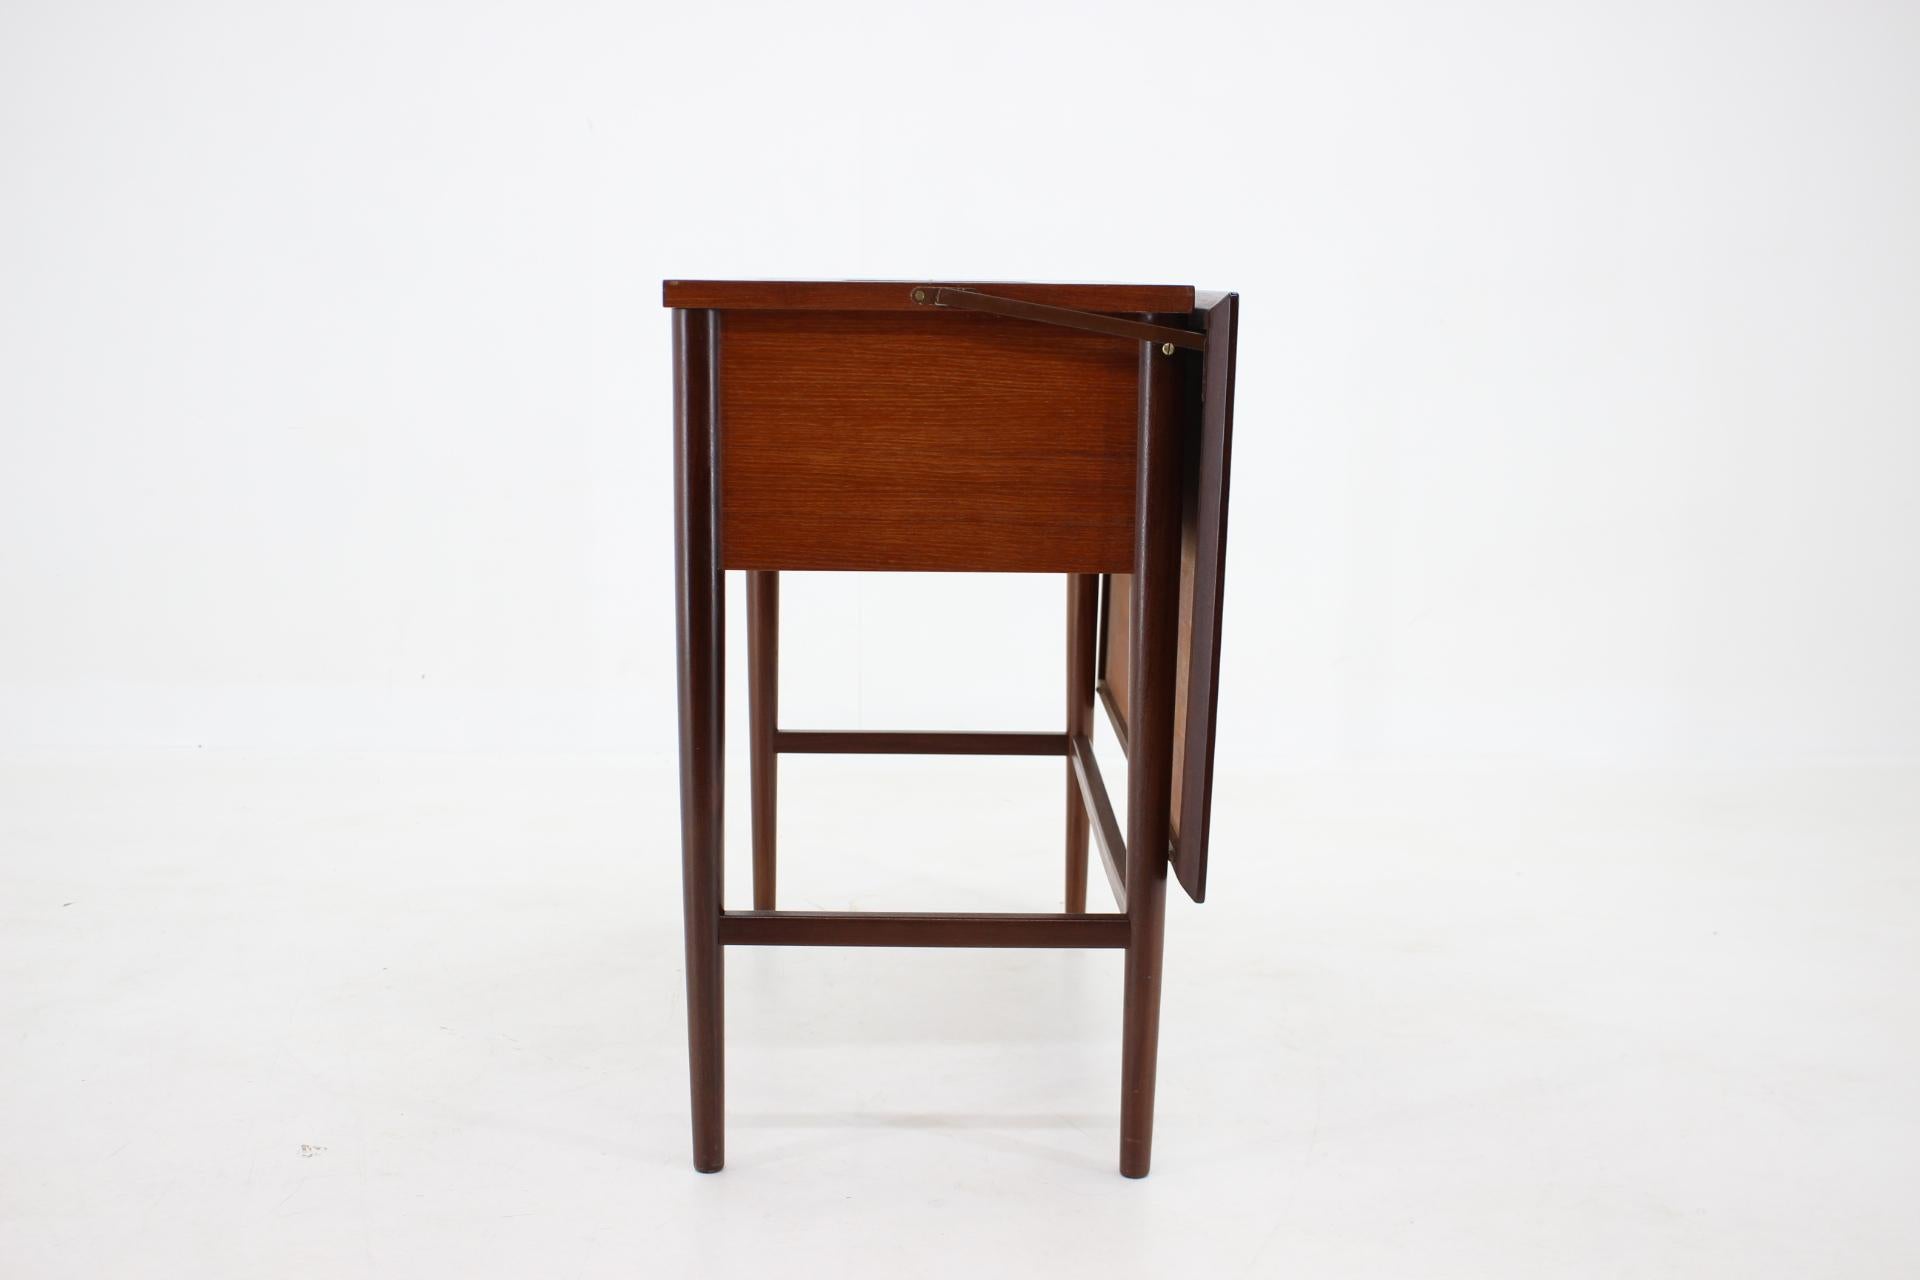 1960s Teak Sewing Table or Table with Built in Sewing Machine, Denmark For Sale 6